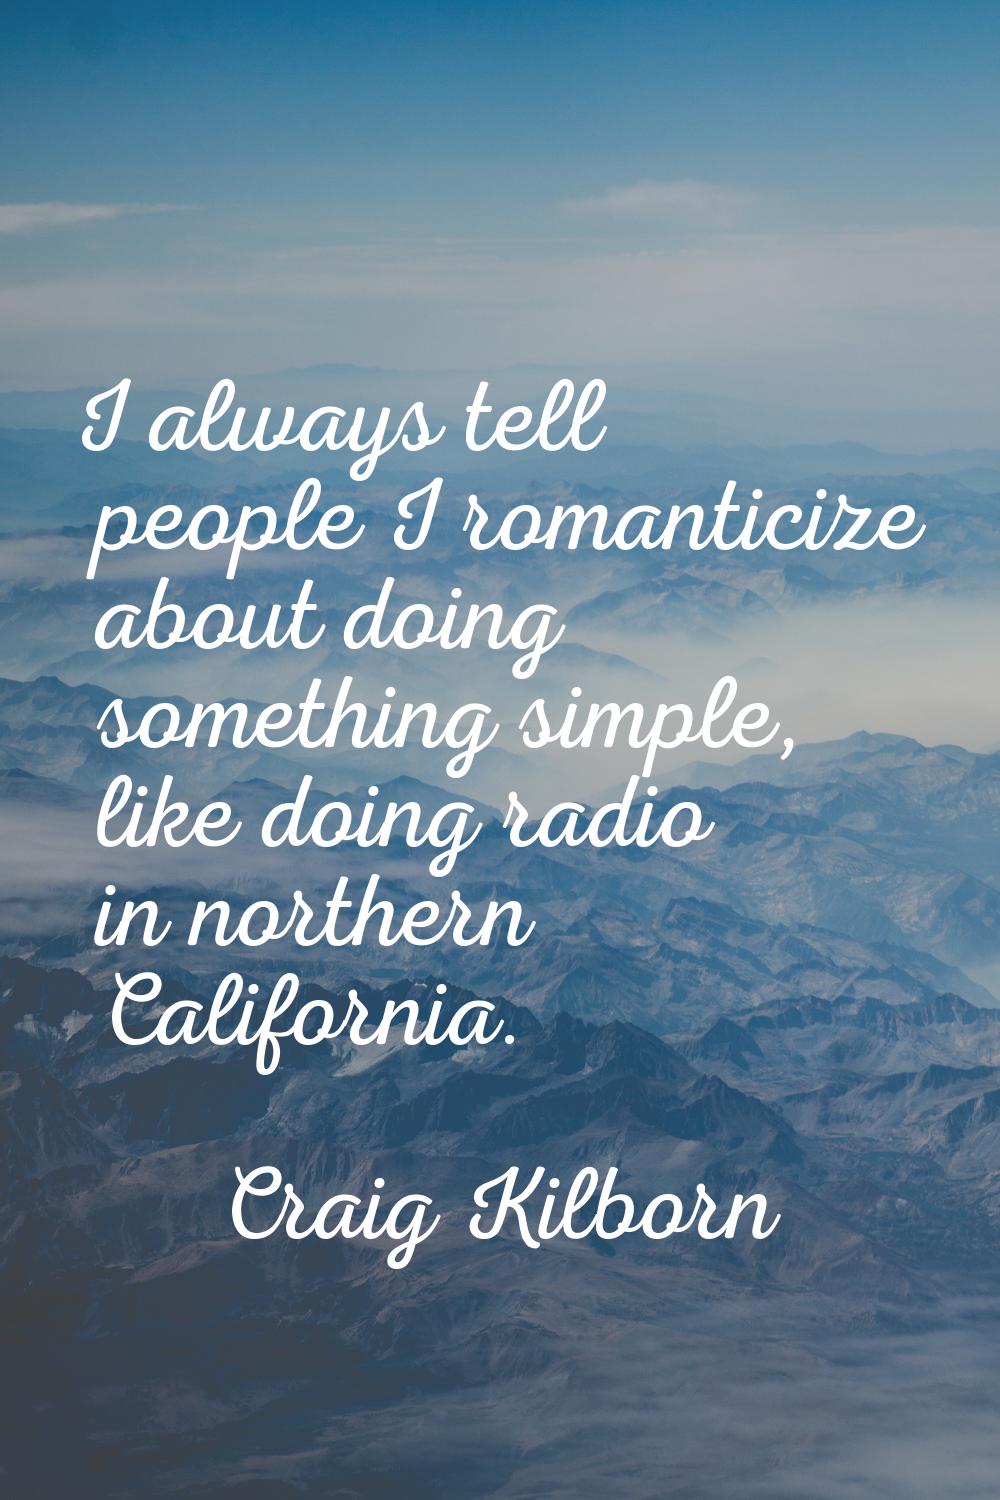 I always tell people I romanticize about doing something simple, like doing radio in northern Calif